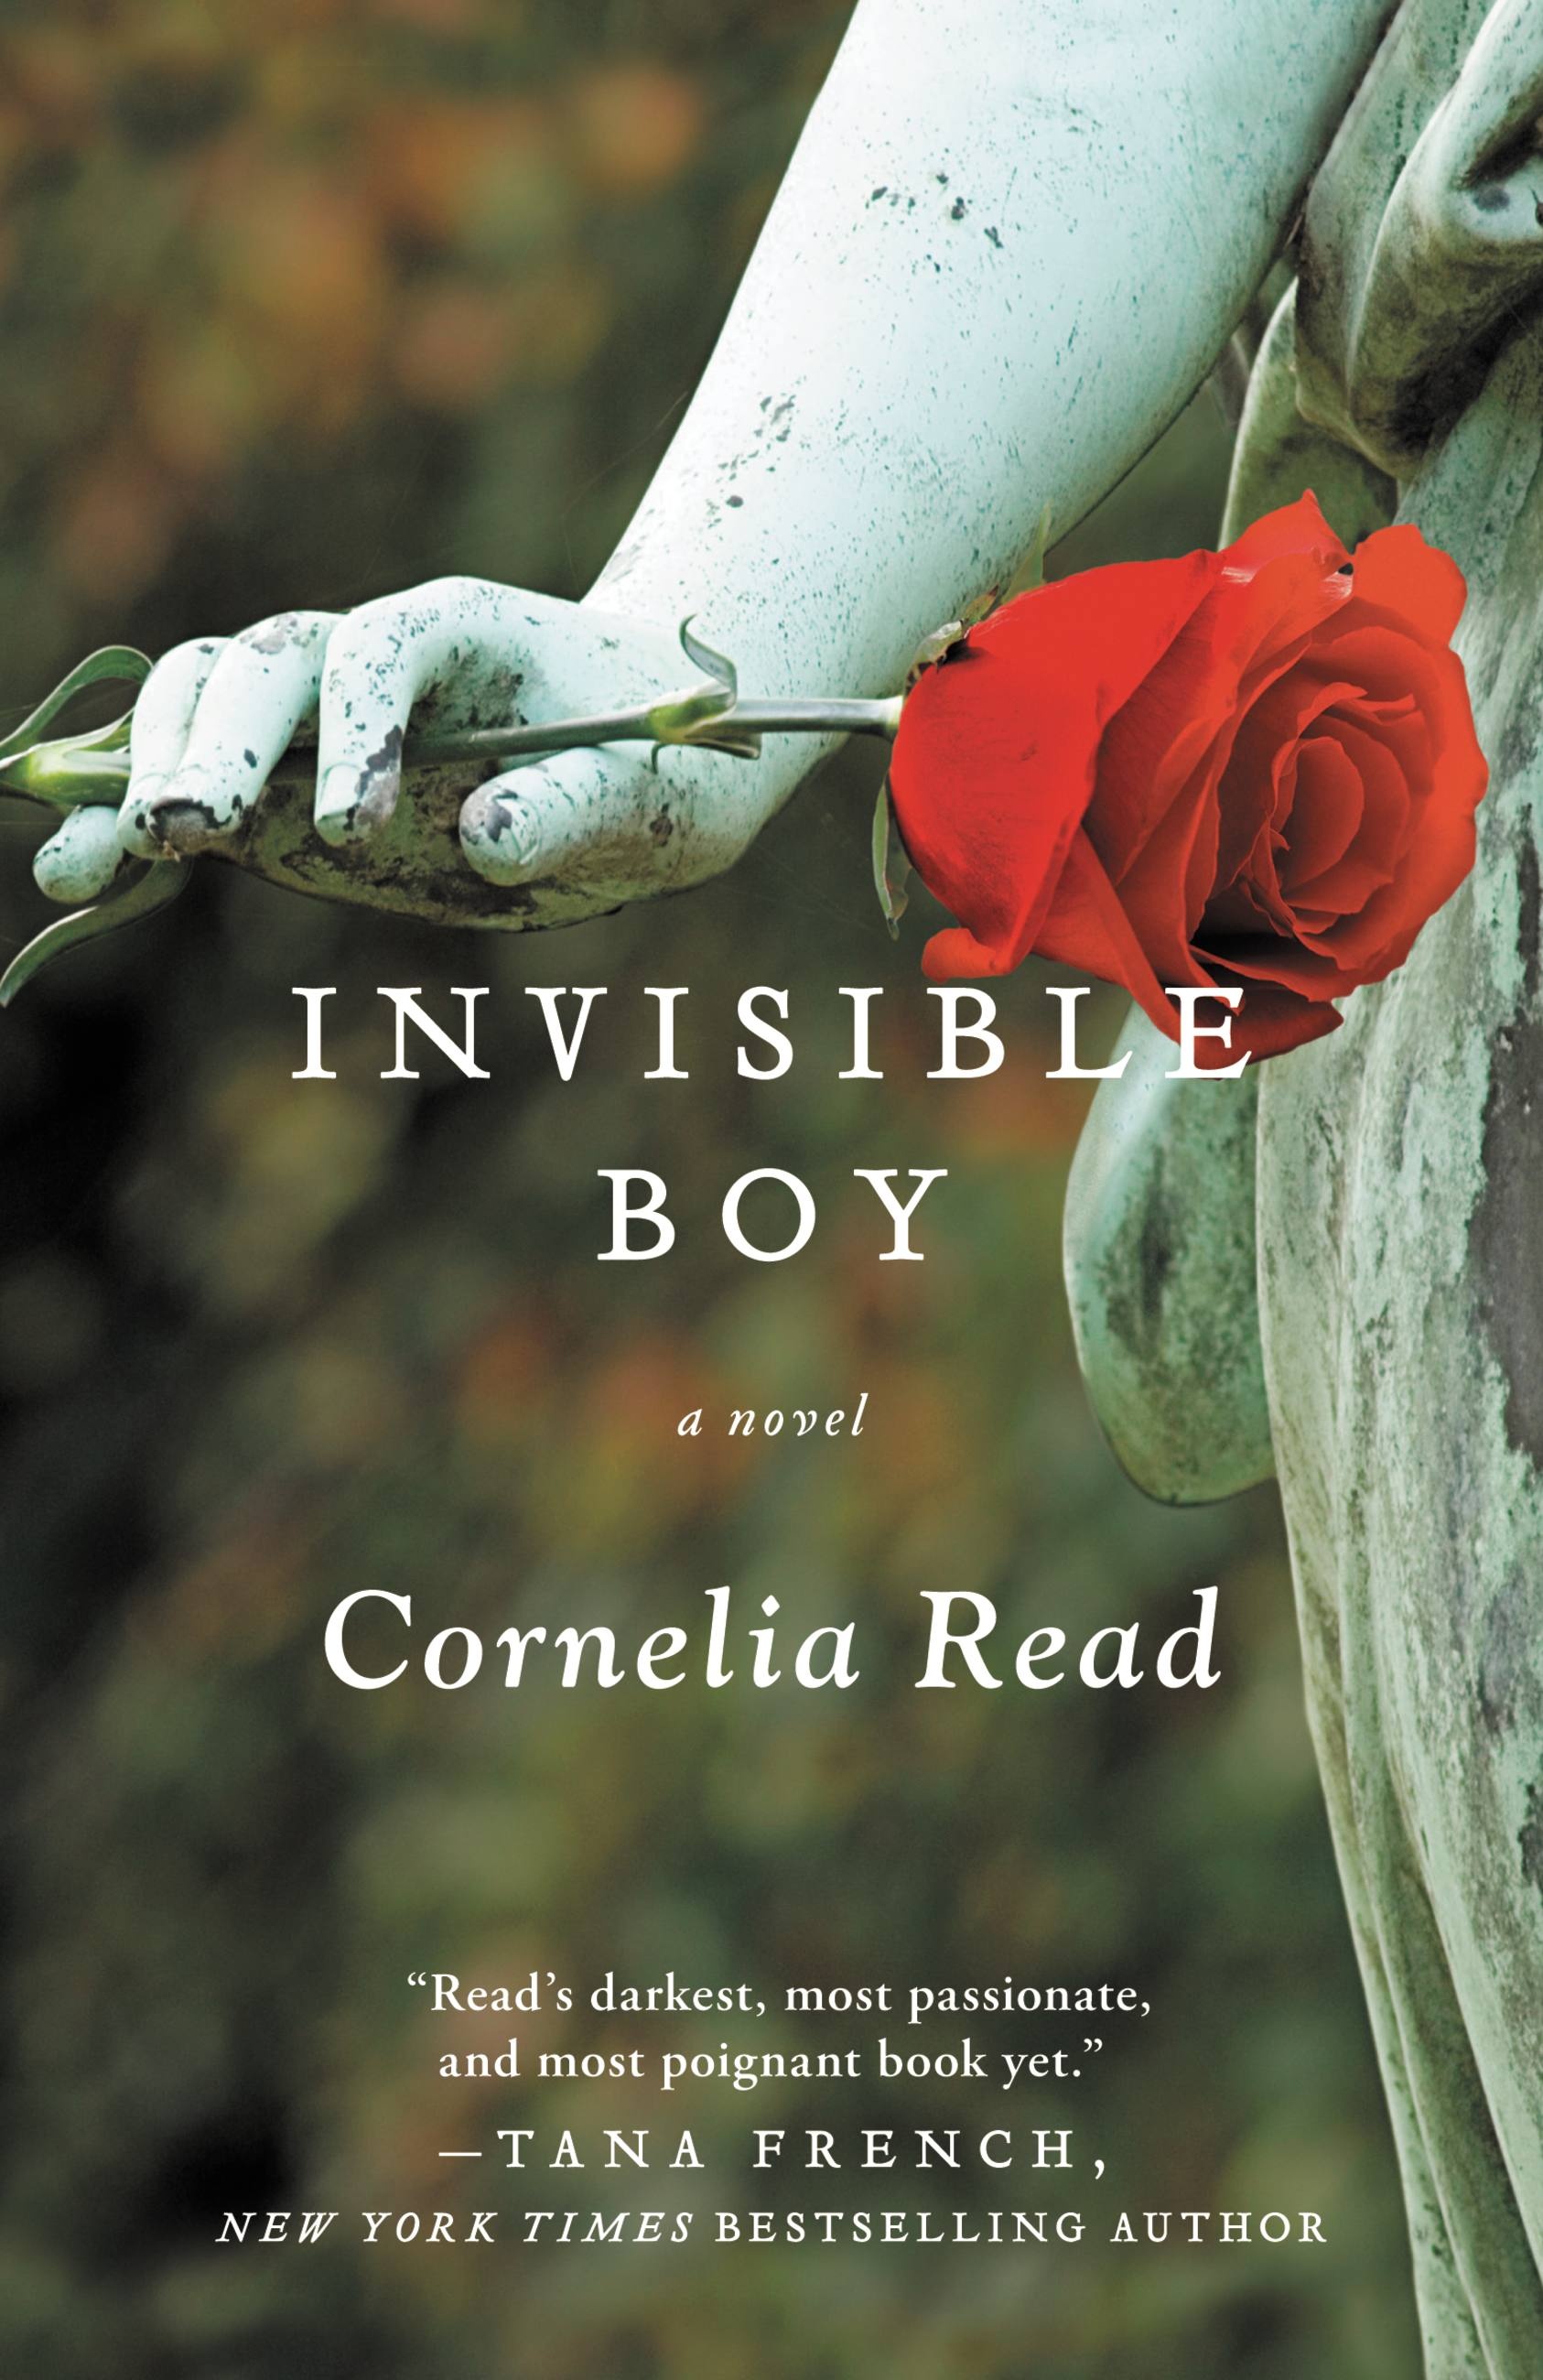 The Invisible boy. The Invincible boy. This book yet